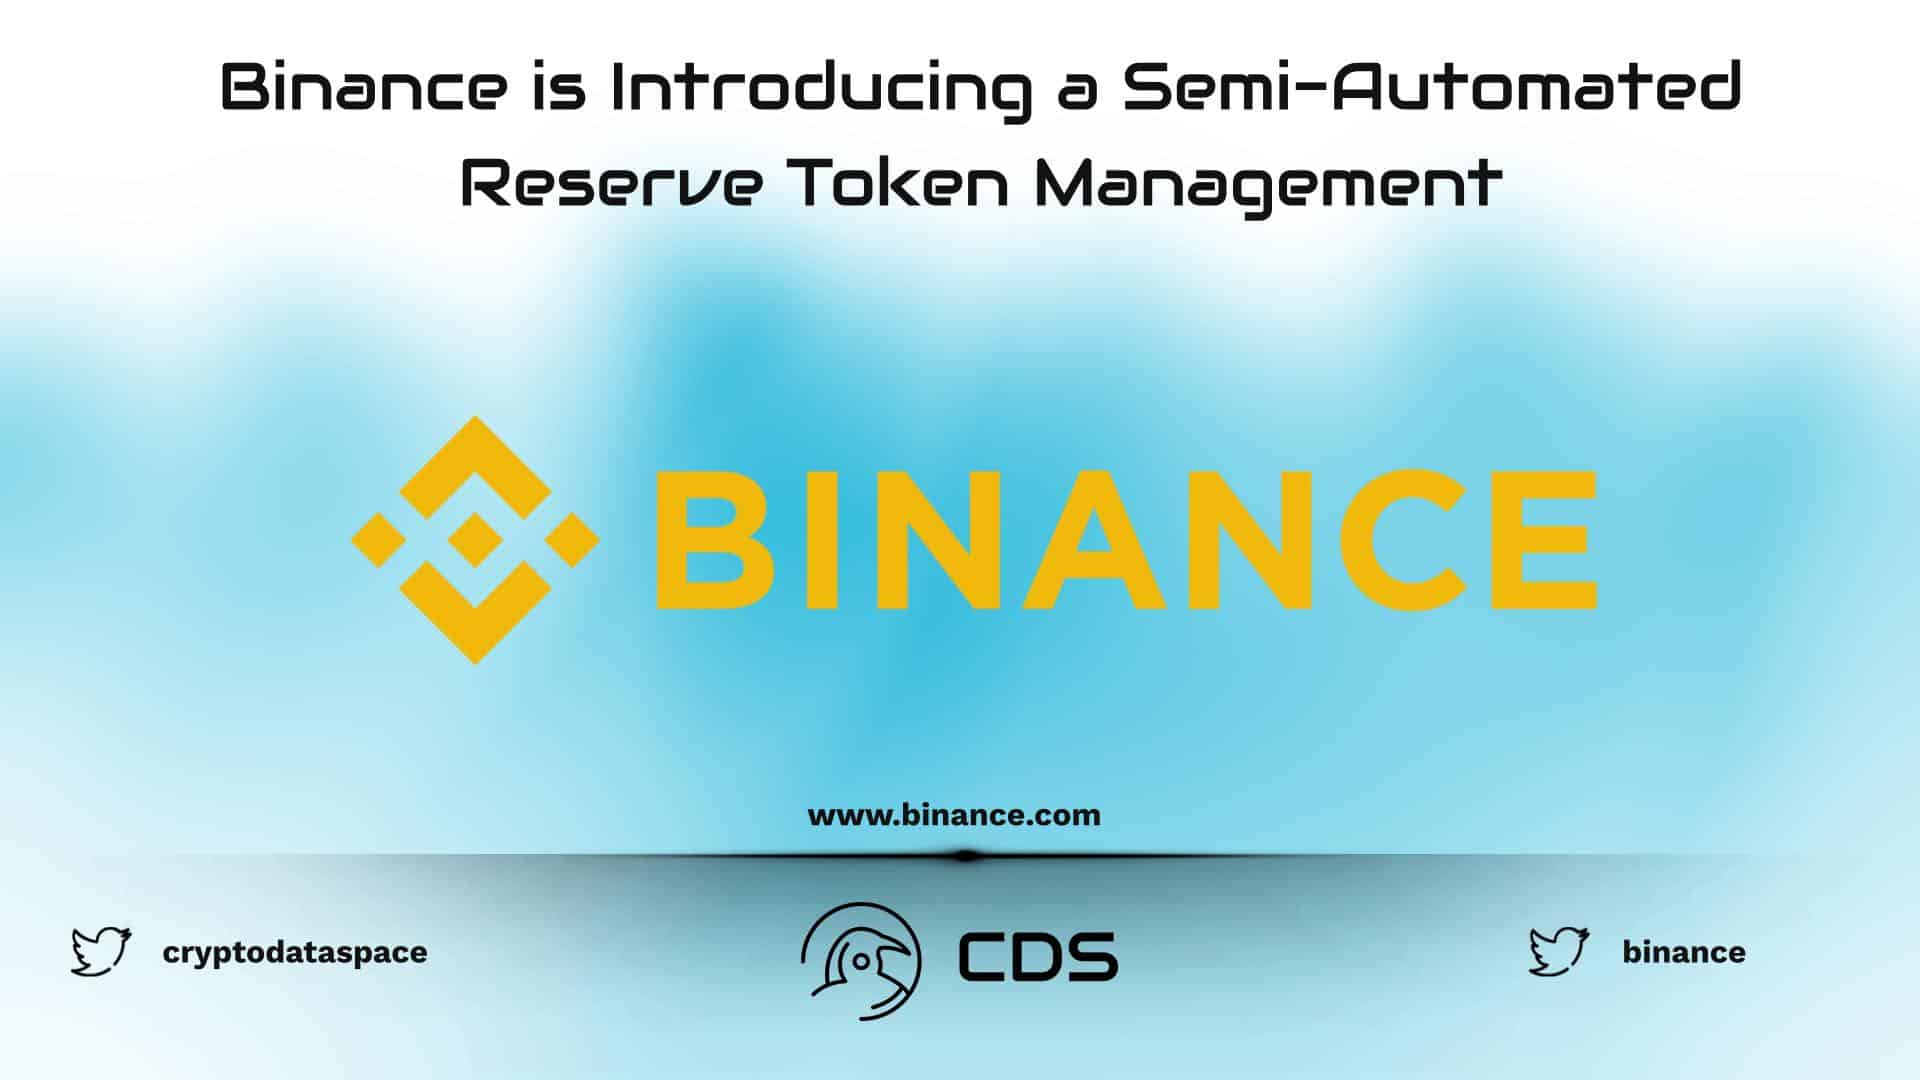 Binance is Introducing a Semi-Automated Reserve Token Management